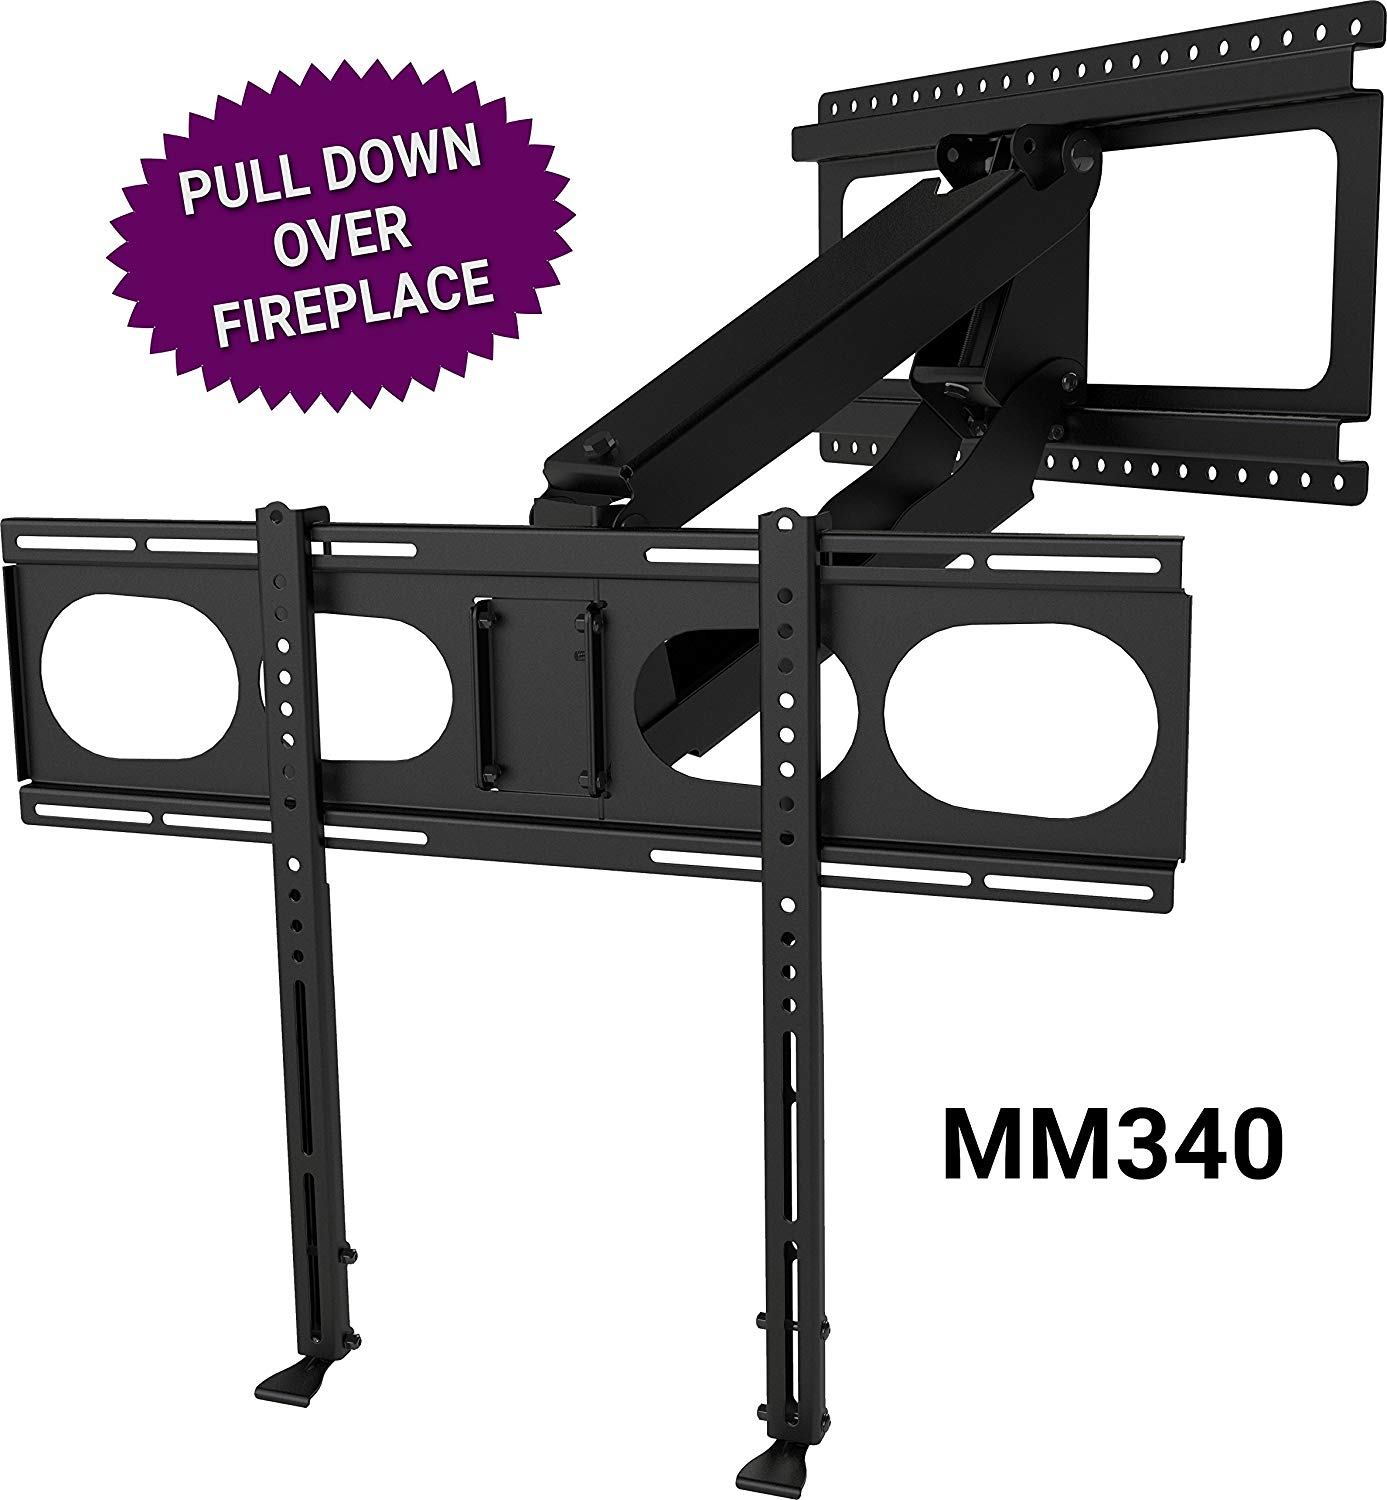 How to Hang A Tv On A Brick Fireplace Luxury Mantelmount Mm340 Fireplace Pull Down Tv Mount